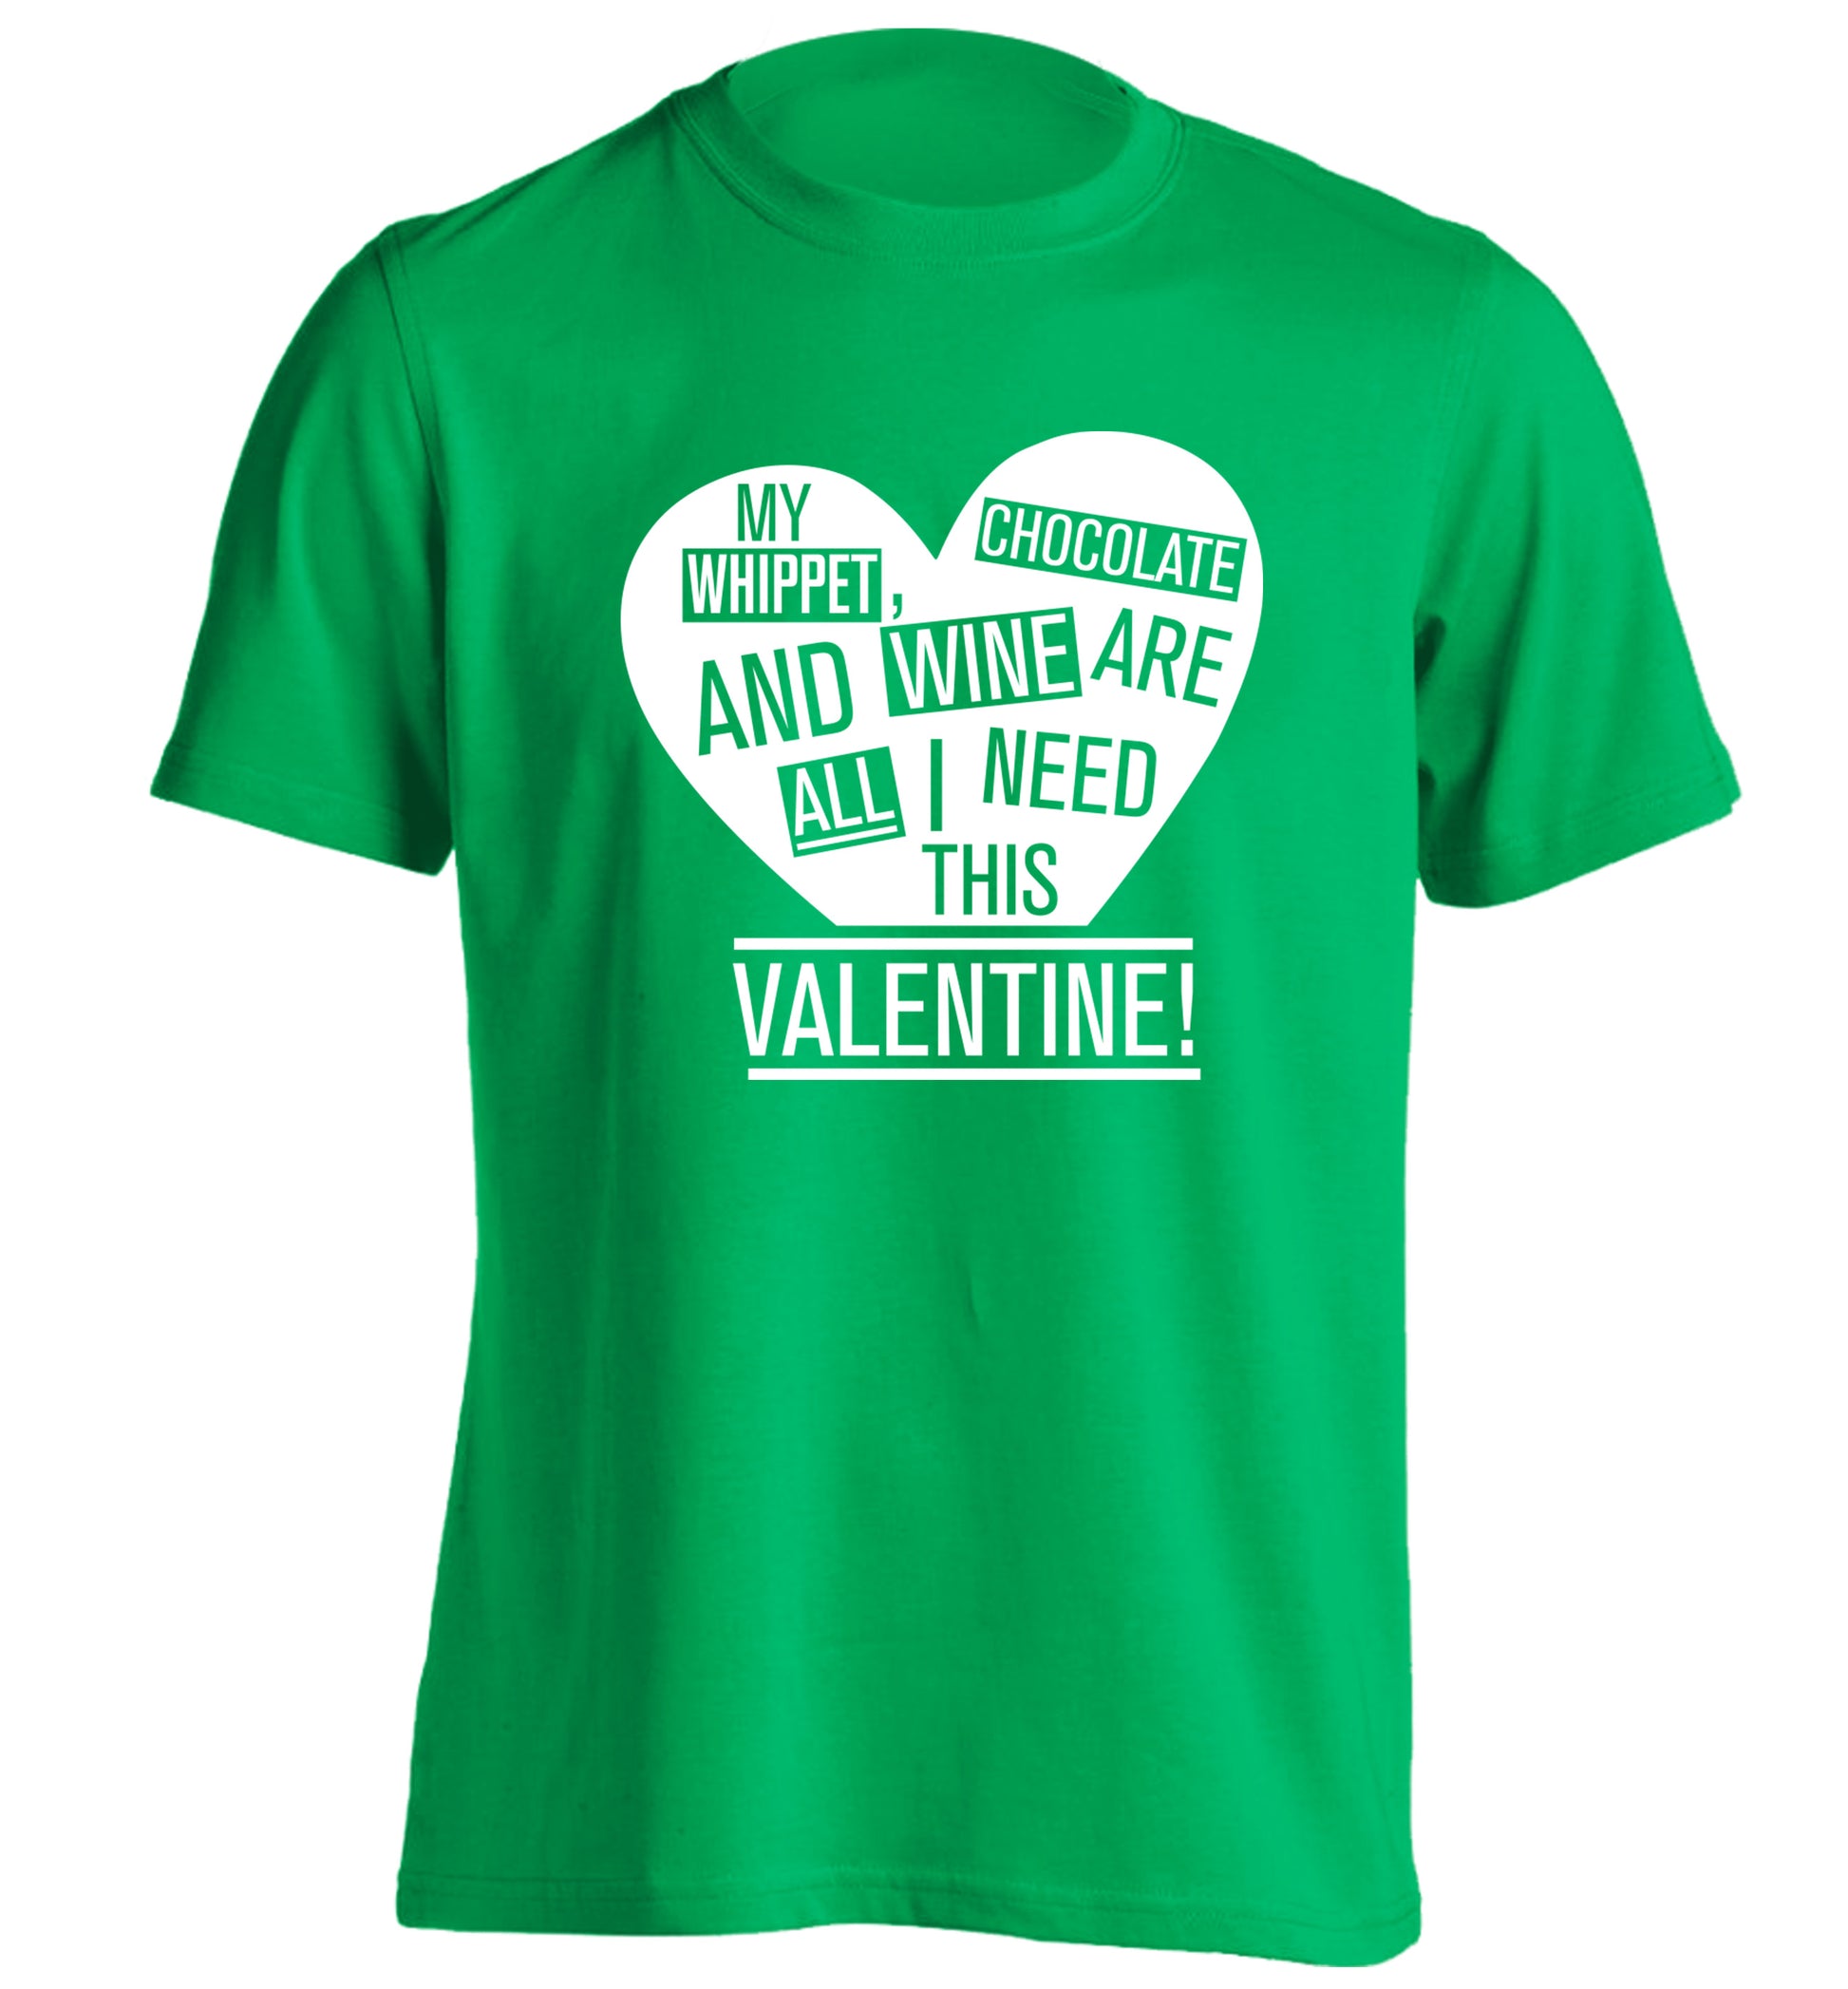 My whippet, chocolate and wine are all I need this valentine! adults unisex green Tshirt 2XL